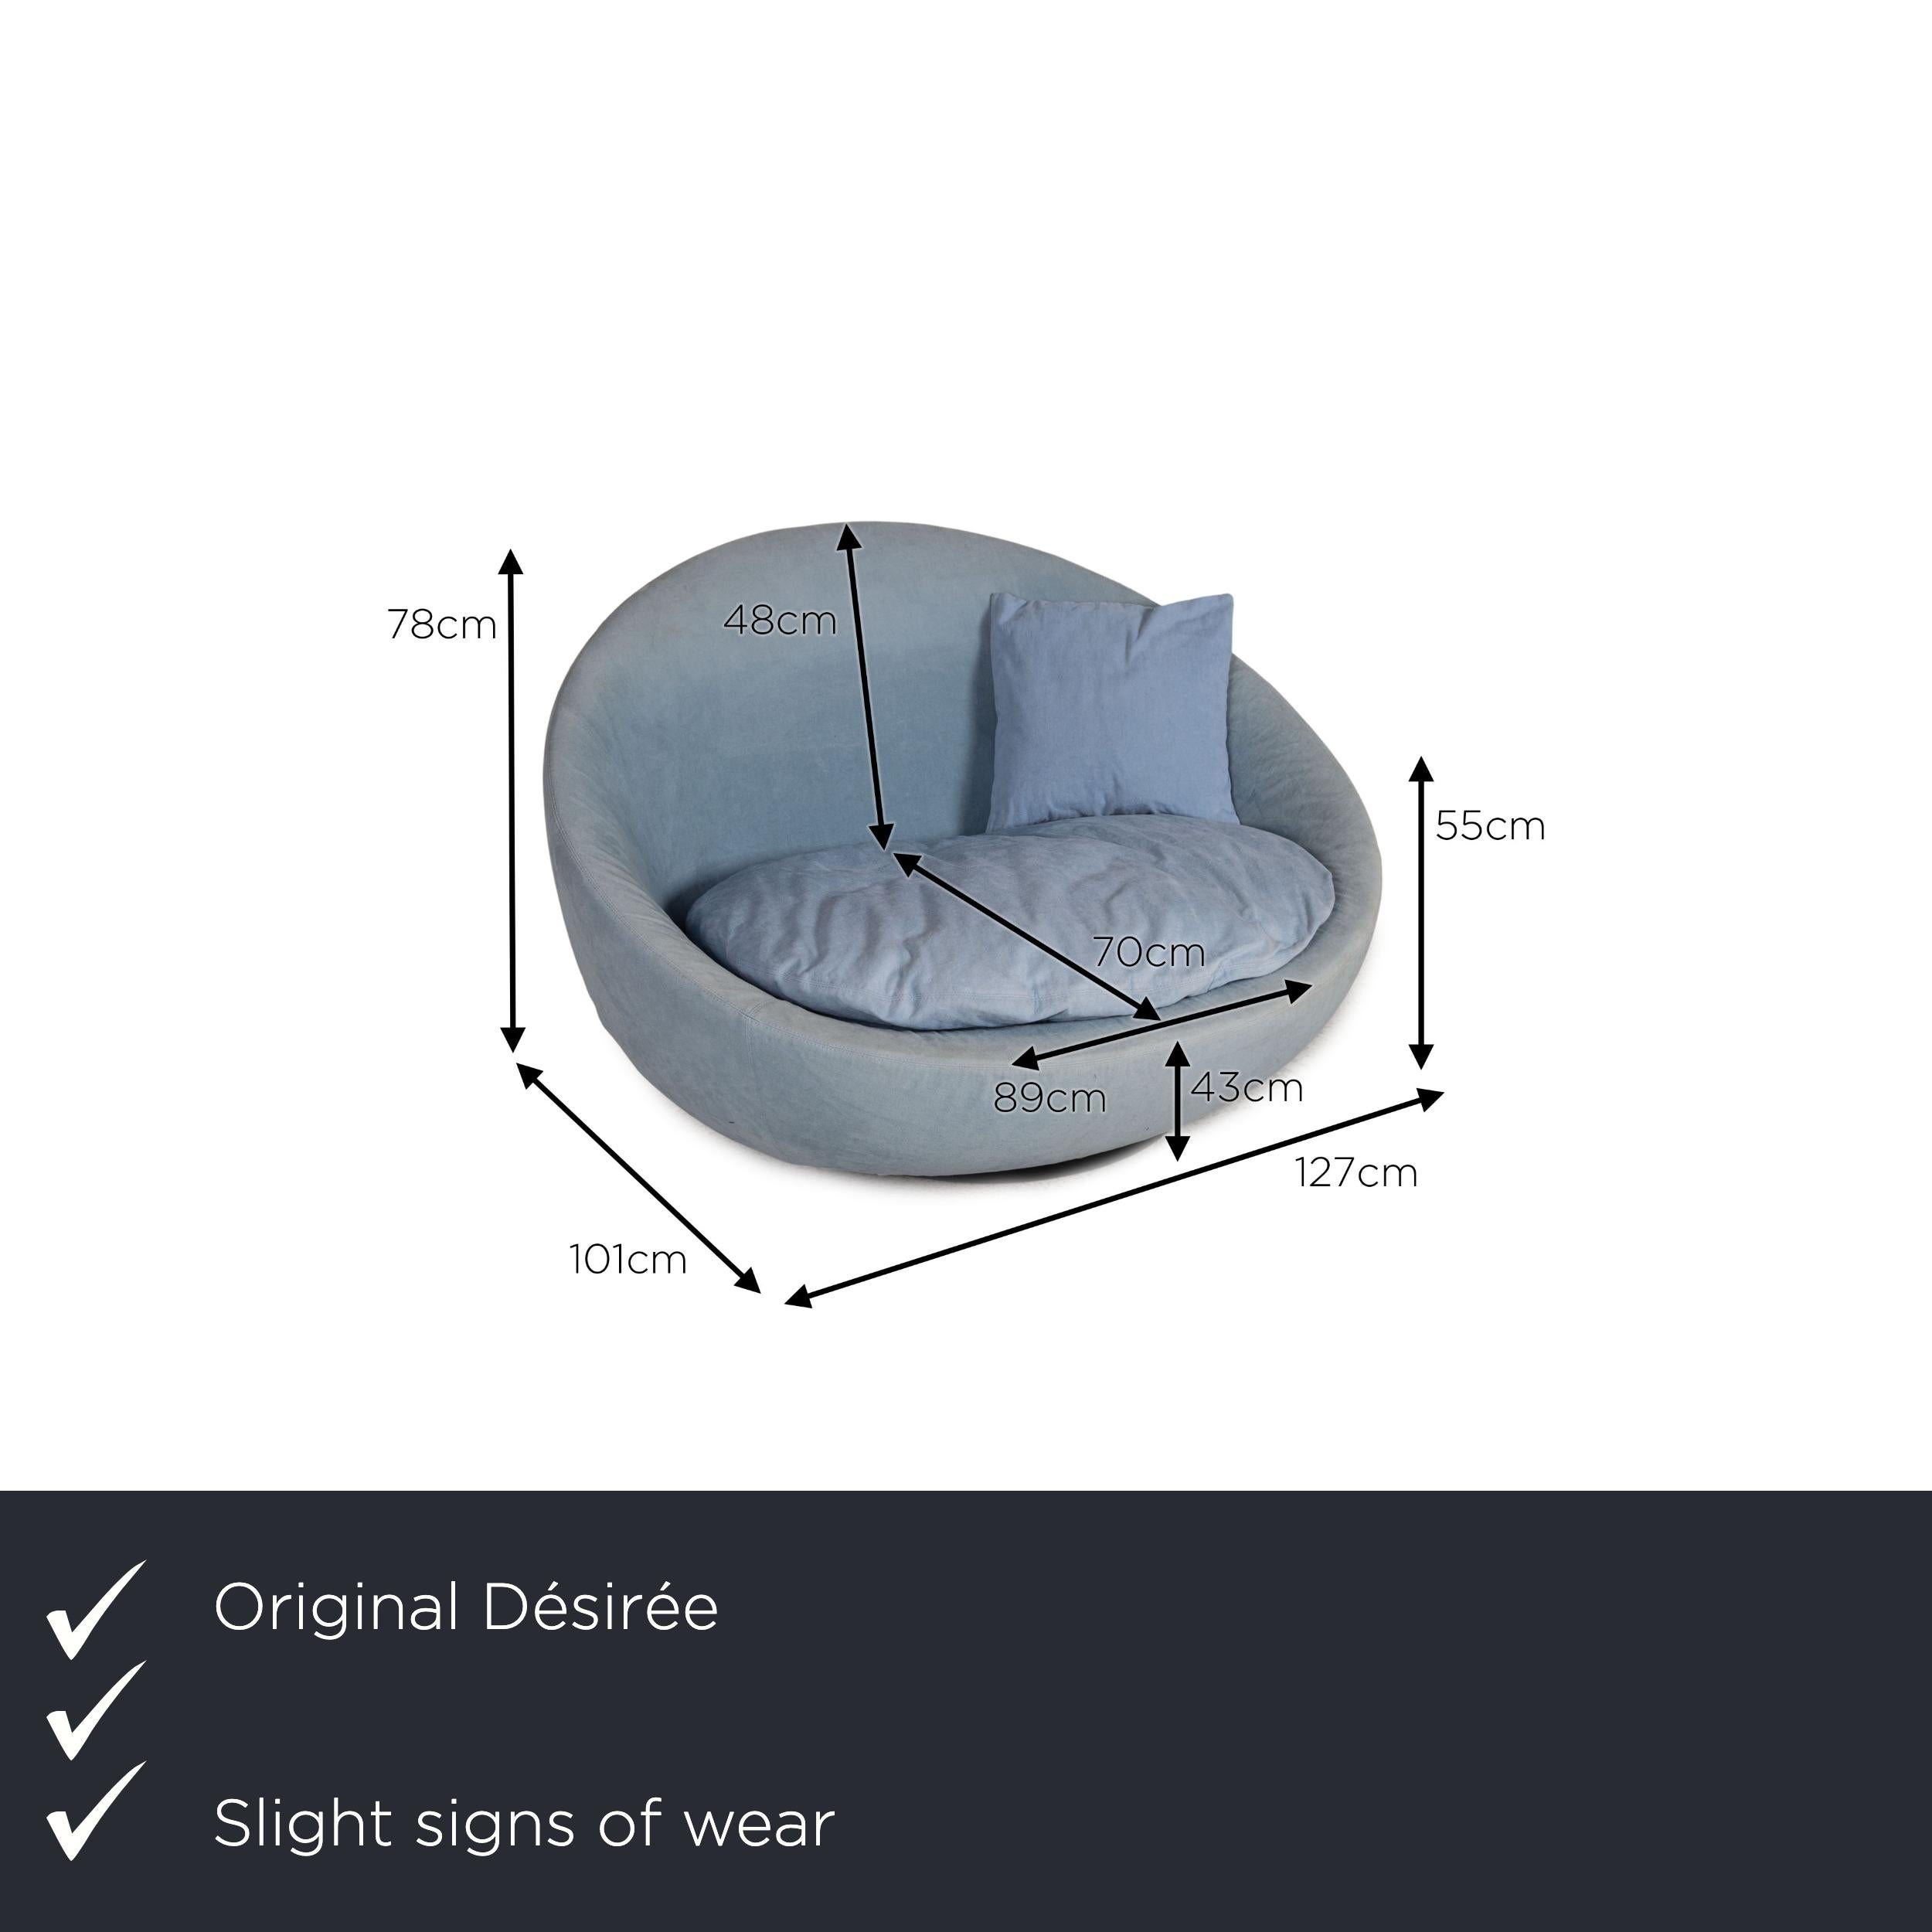 We present to you a Désirée Lacoon island fabric sofa blue two-seater couch.

Product measurements in centimeters:

depth: 101
width: 127
height: 78
seat height: 43
rest height: 55
seat depth: 70
seat width: 89
back height: 48.
 
 